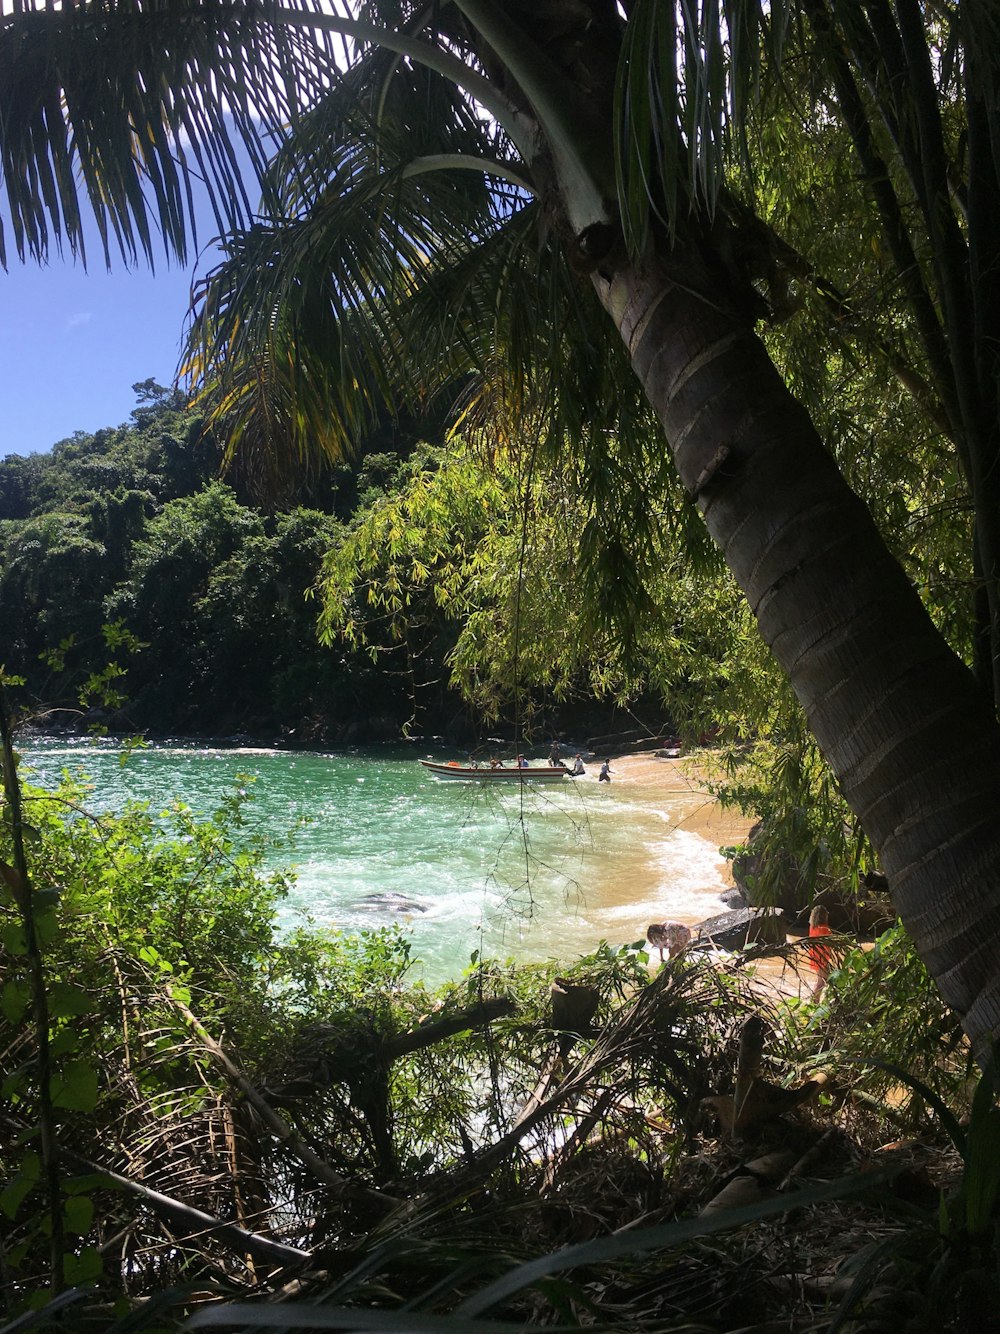 a view of a beach from a jungle setting